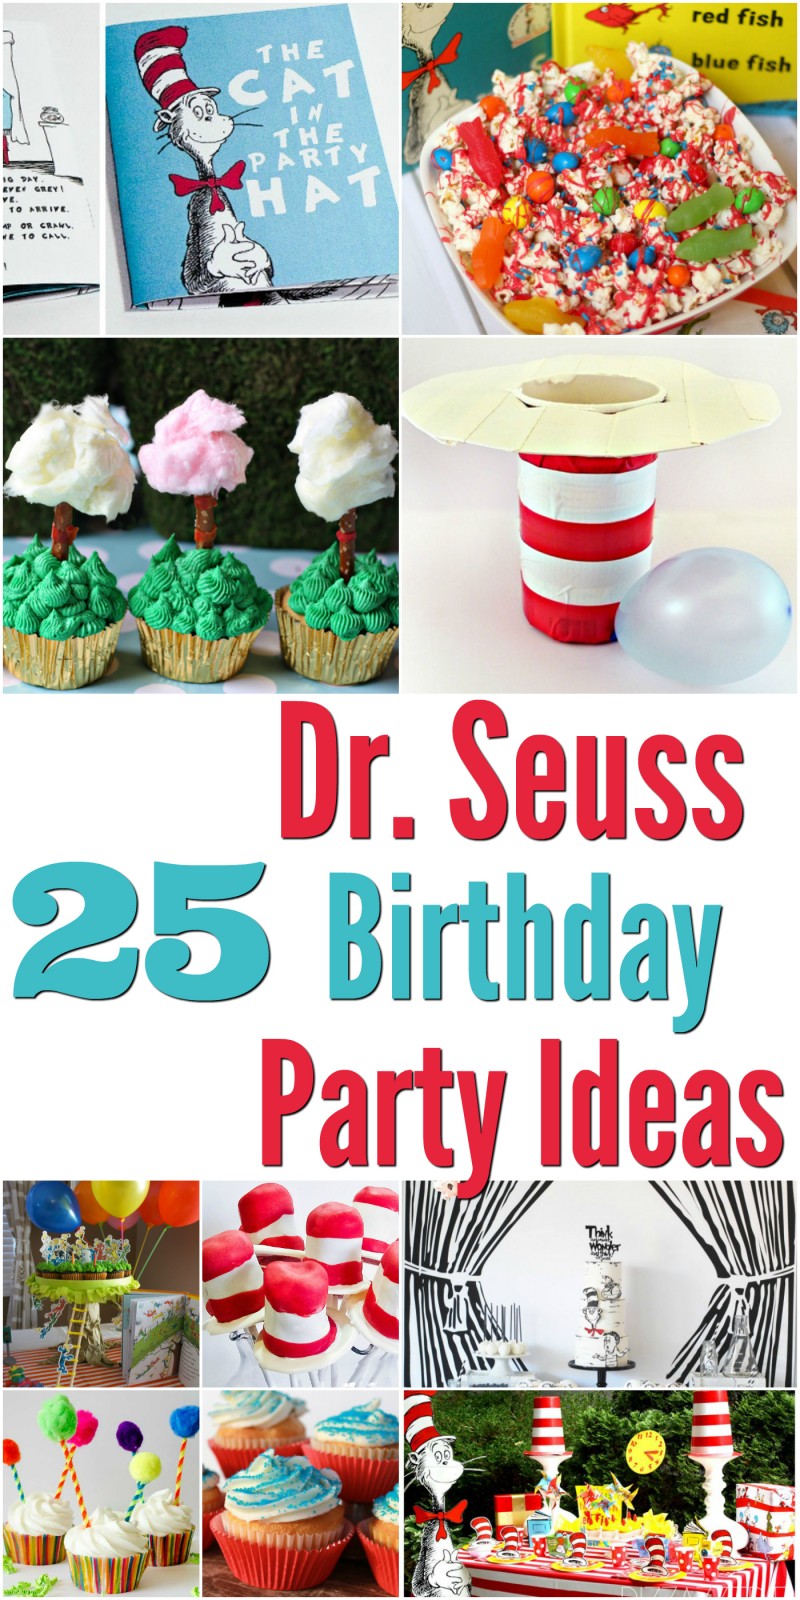 DrSeussBirthdayPartyIdea_WithText